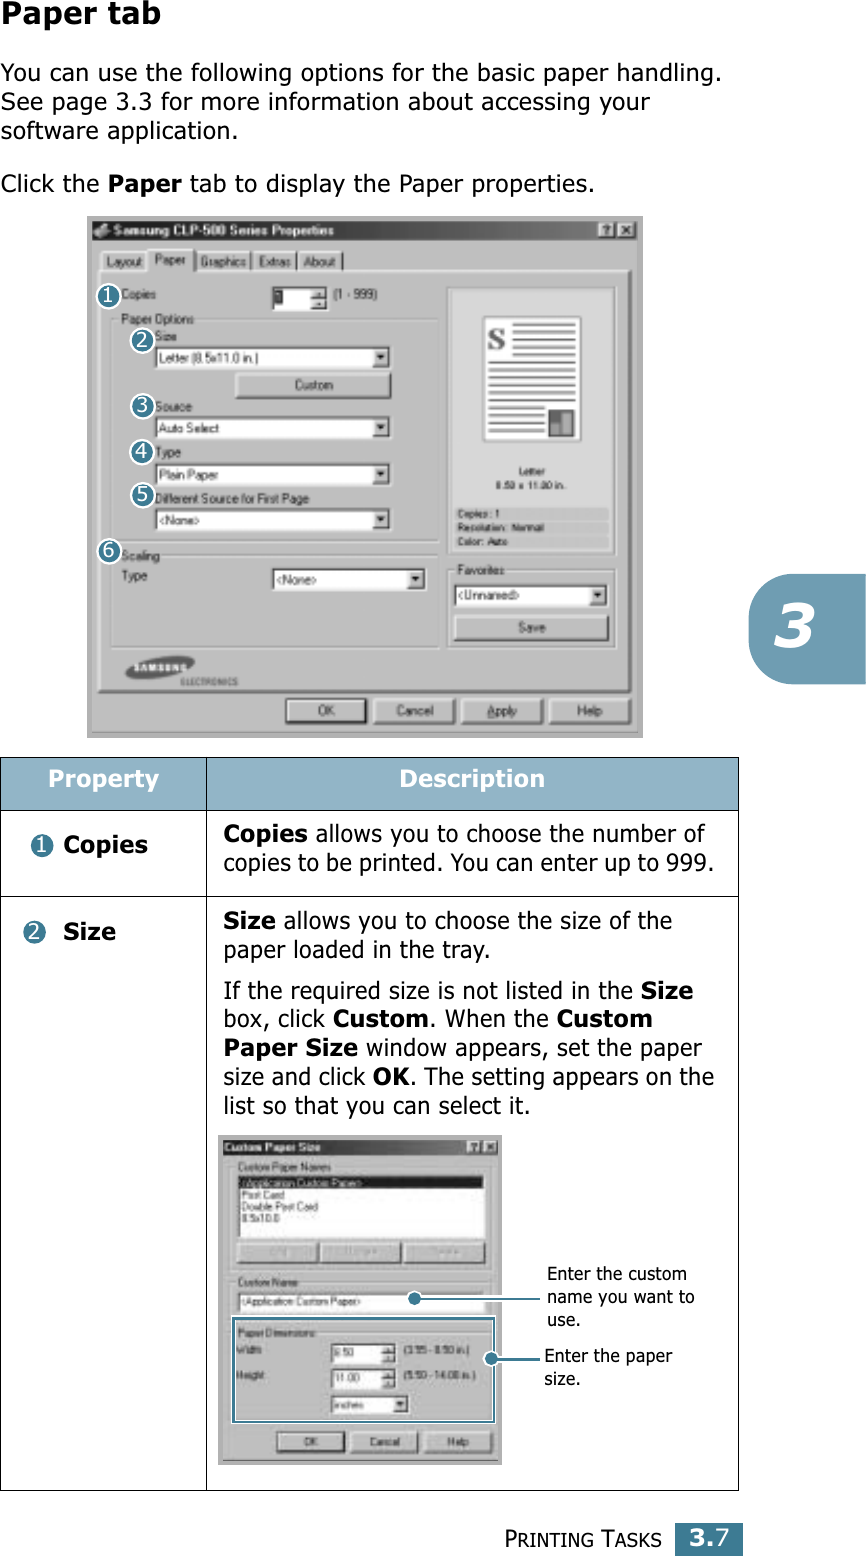 PRINTING TASKS3.73Paper tabYou can use the following options for the basic paper handling. See page 3.3 for more information about accessing your software application. Click the Paper tab to display the Paper properties. Property Description Copies Copies allows you to choose the number of copies to be printed. You can enter up to 999.  Size Size allows you to choose the size of the paper loaded in the tray. If the required size is not listed in the Size box, click Custom. When the Custom Paper Size window appears, set the paper size and click OK. The setting appears on the list so that you can select it. 12345612Enter the custom name you want to use. Enter the paper size. 